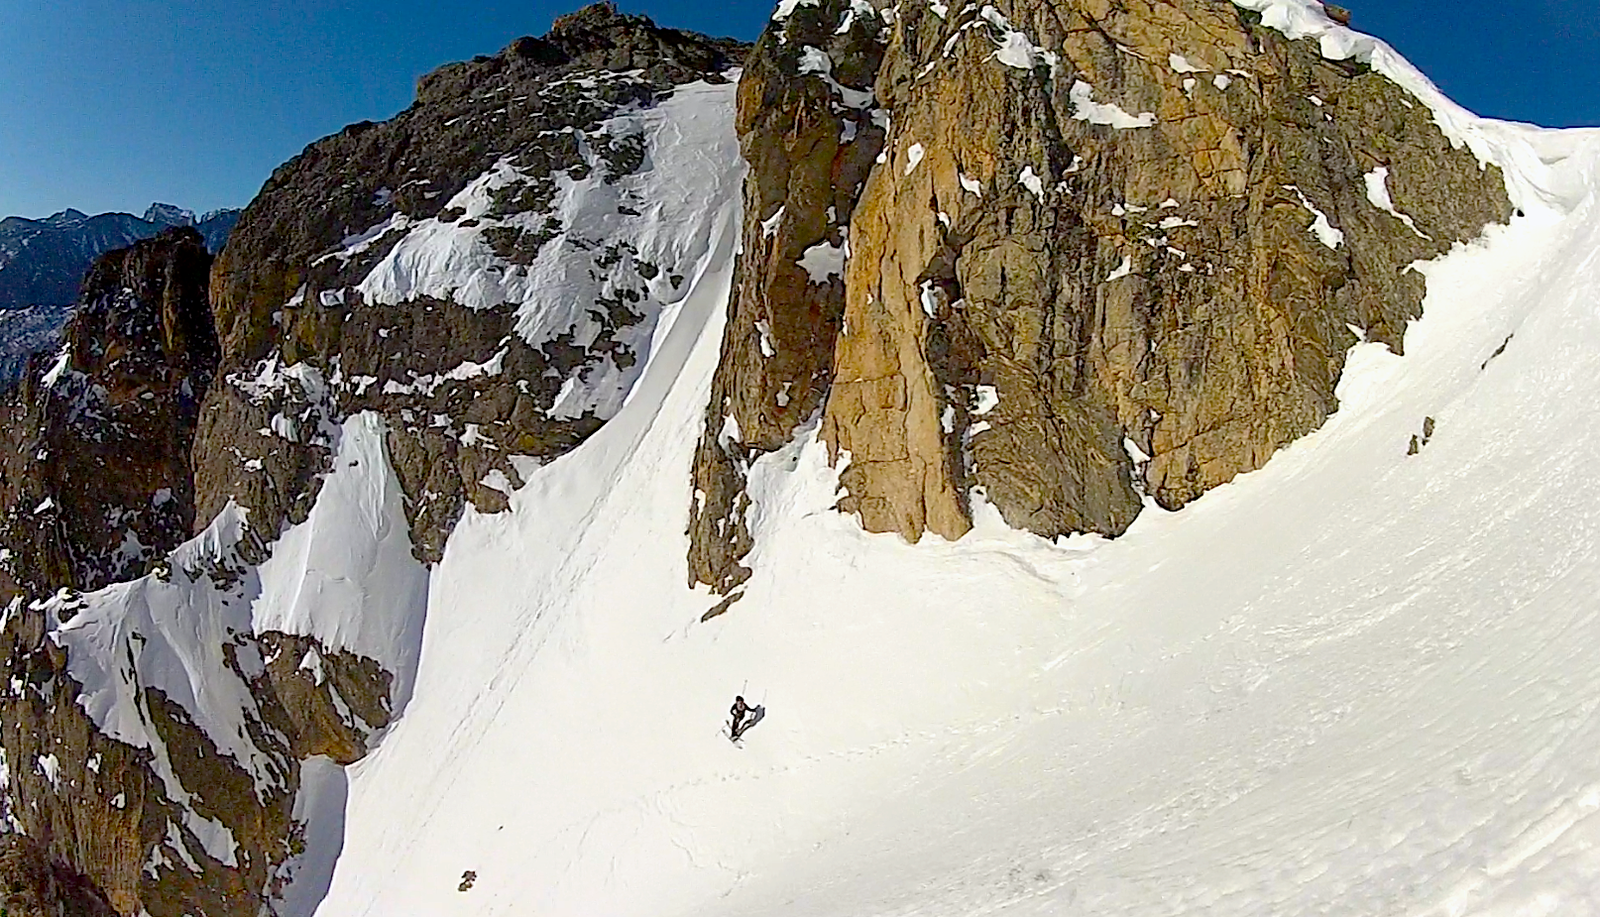 Top of Dragon's Tail Couloir